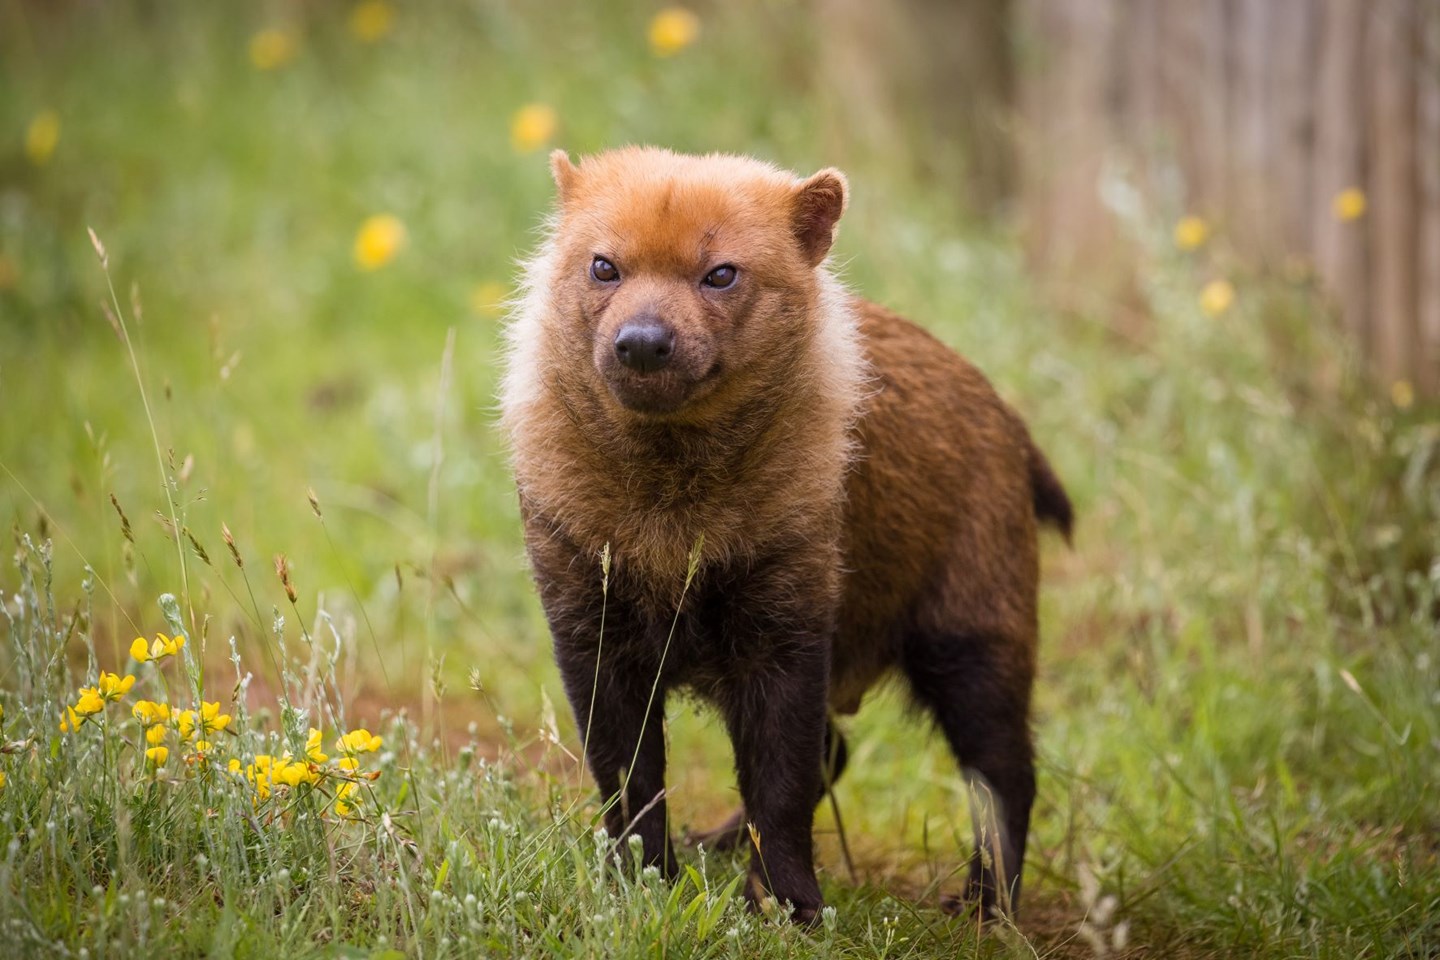 Bush dog stands in grassy enclosure surrounded by small yellow flowers